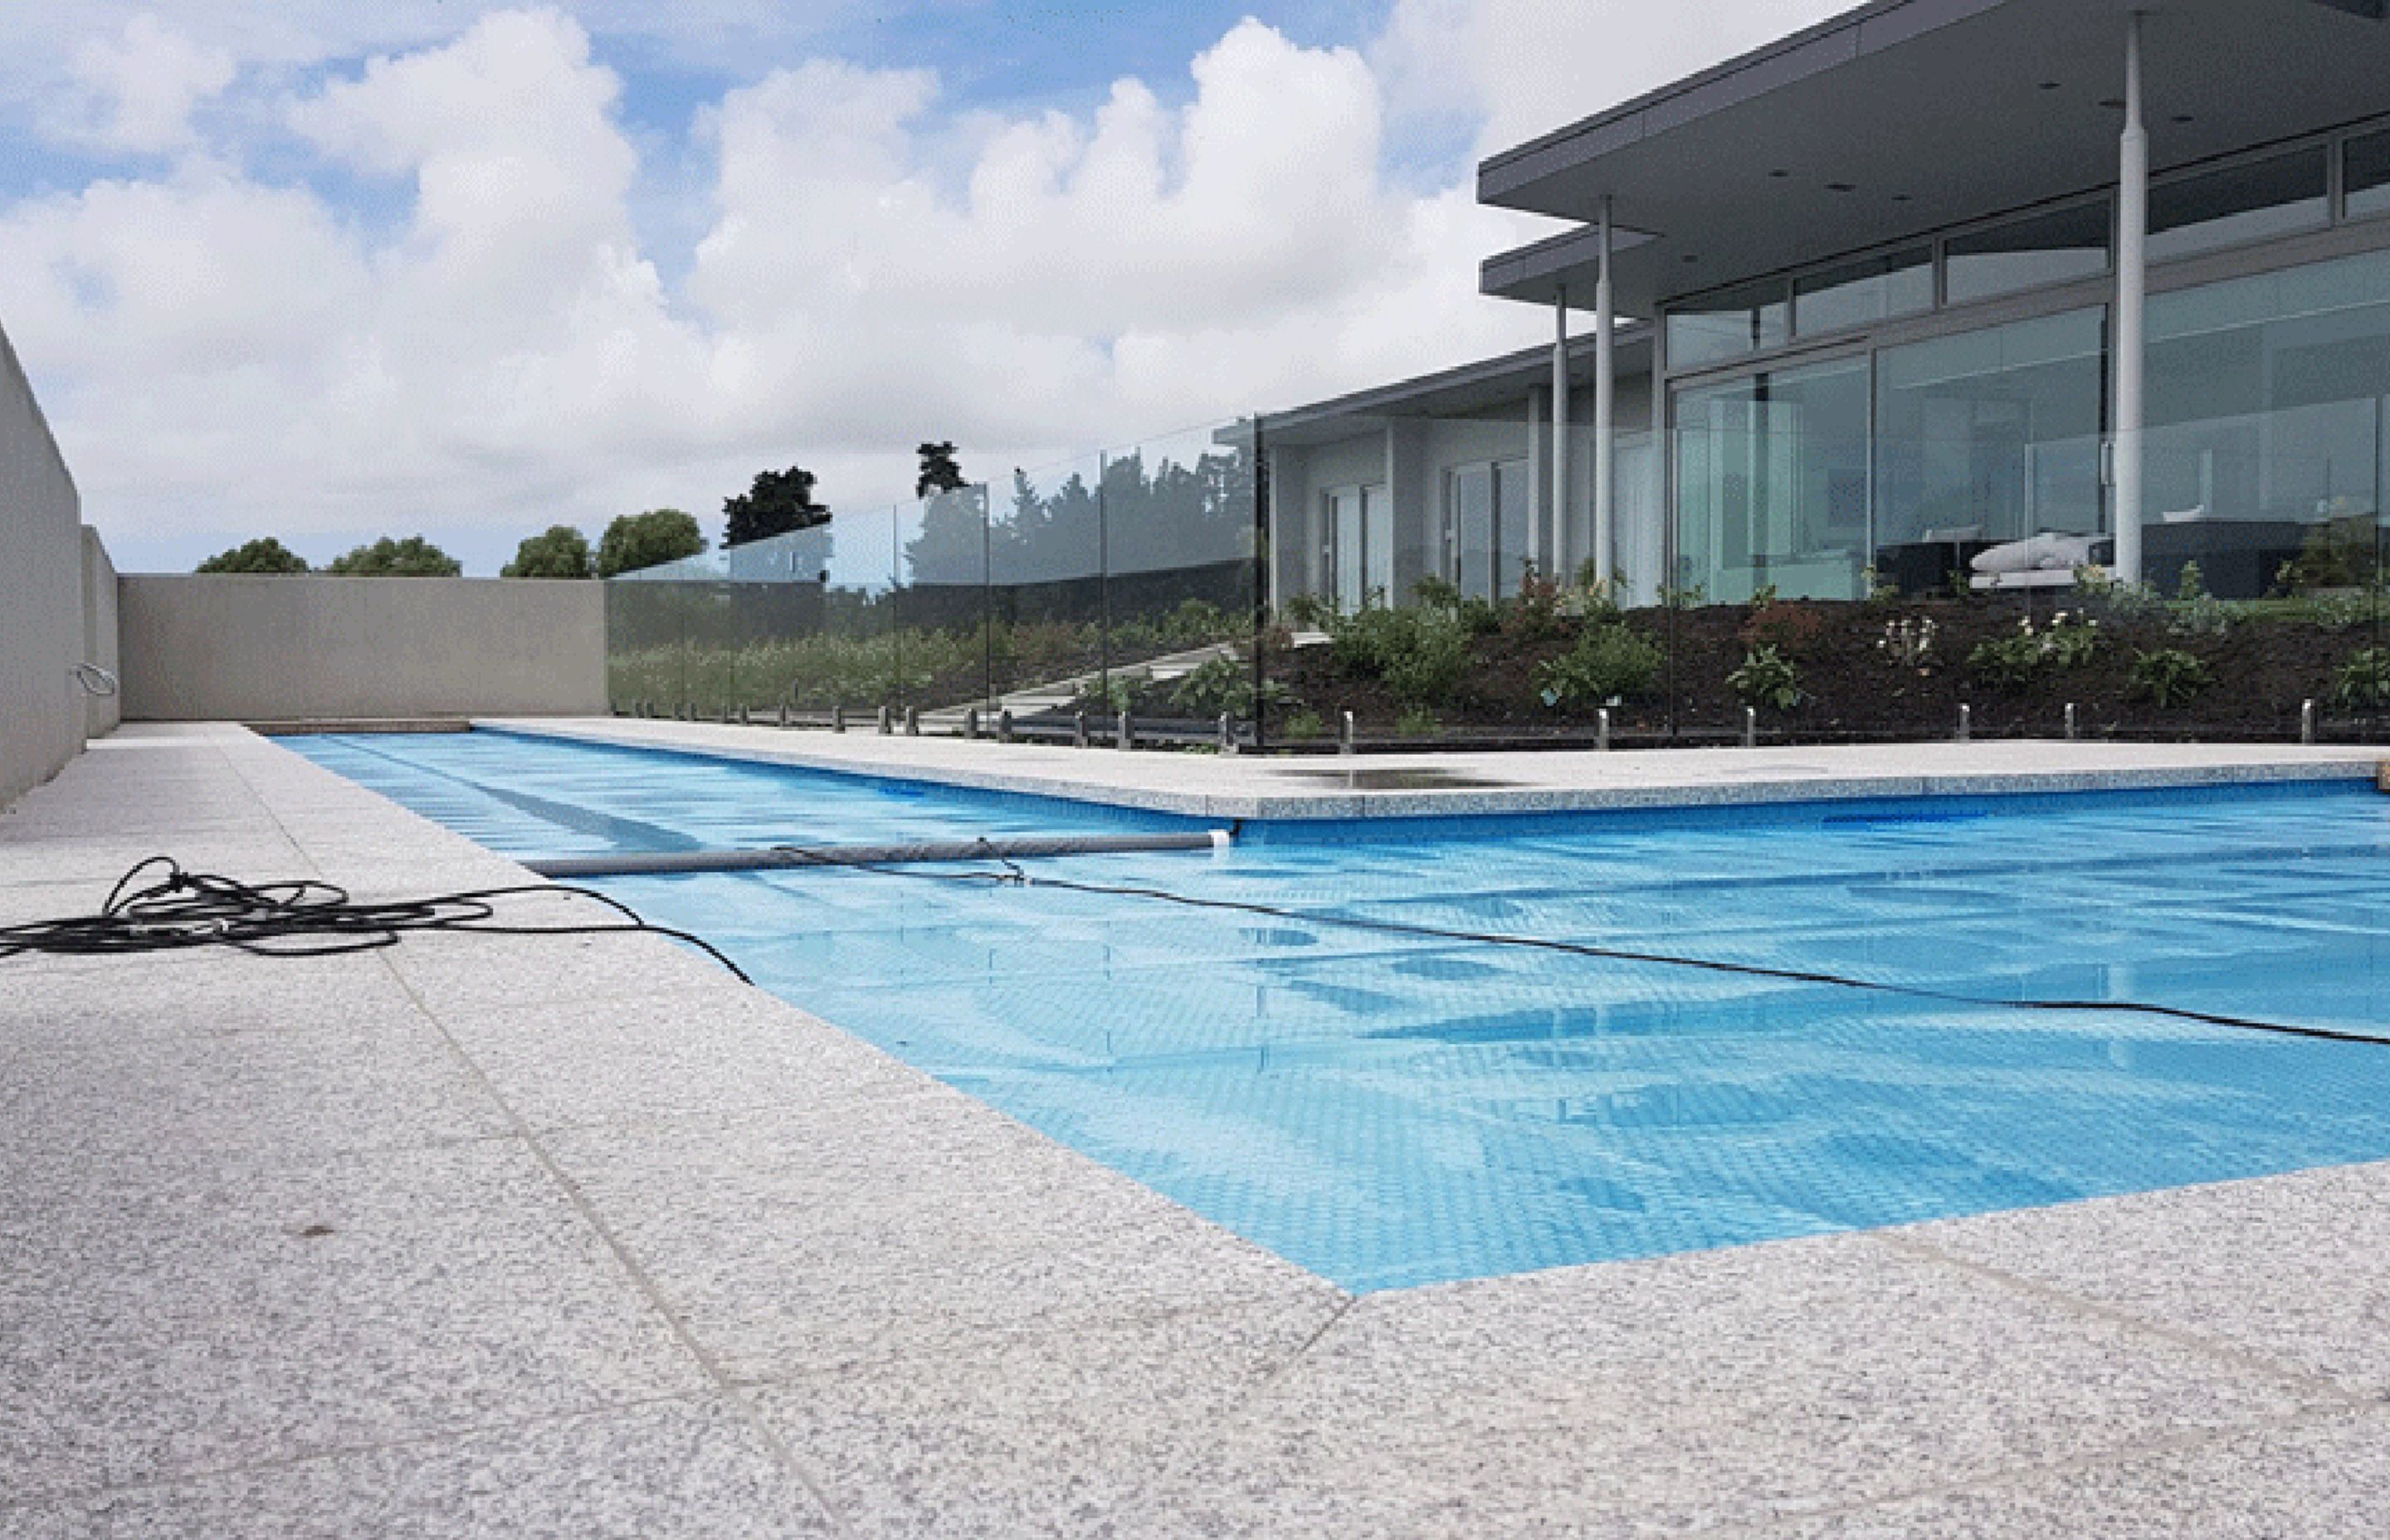 Mayfair Pools - Pool of the Year